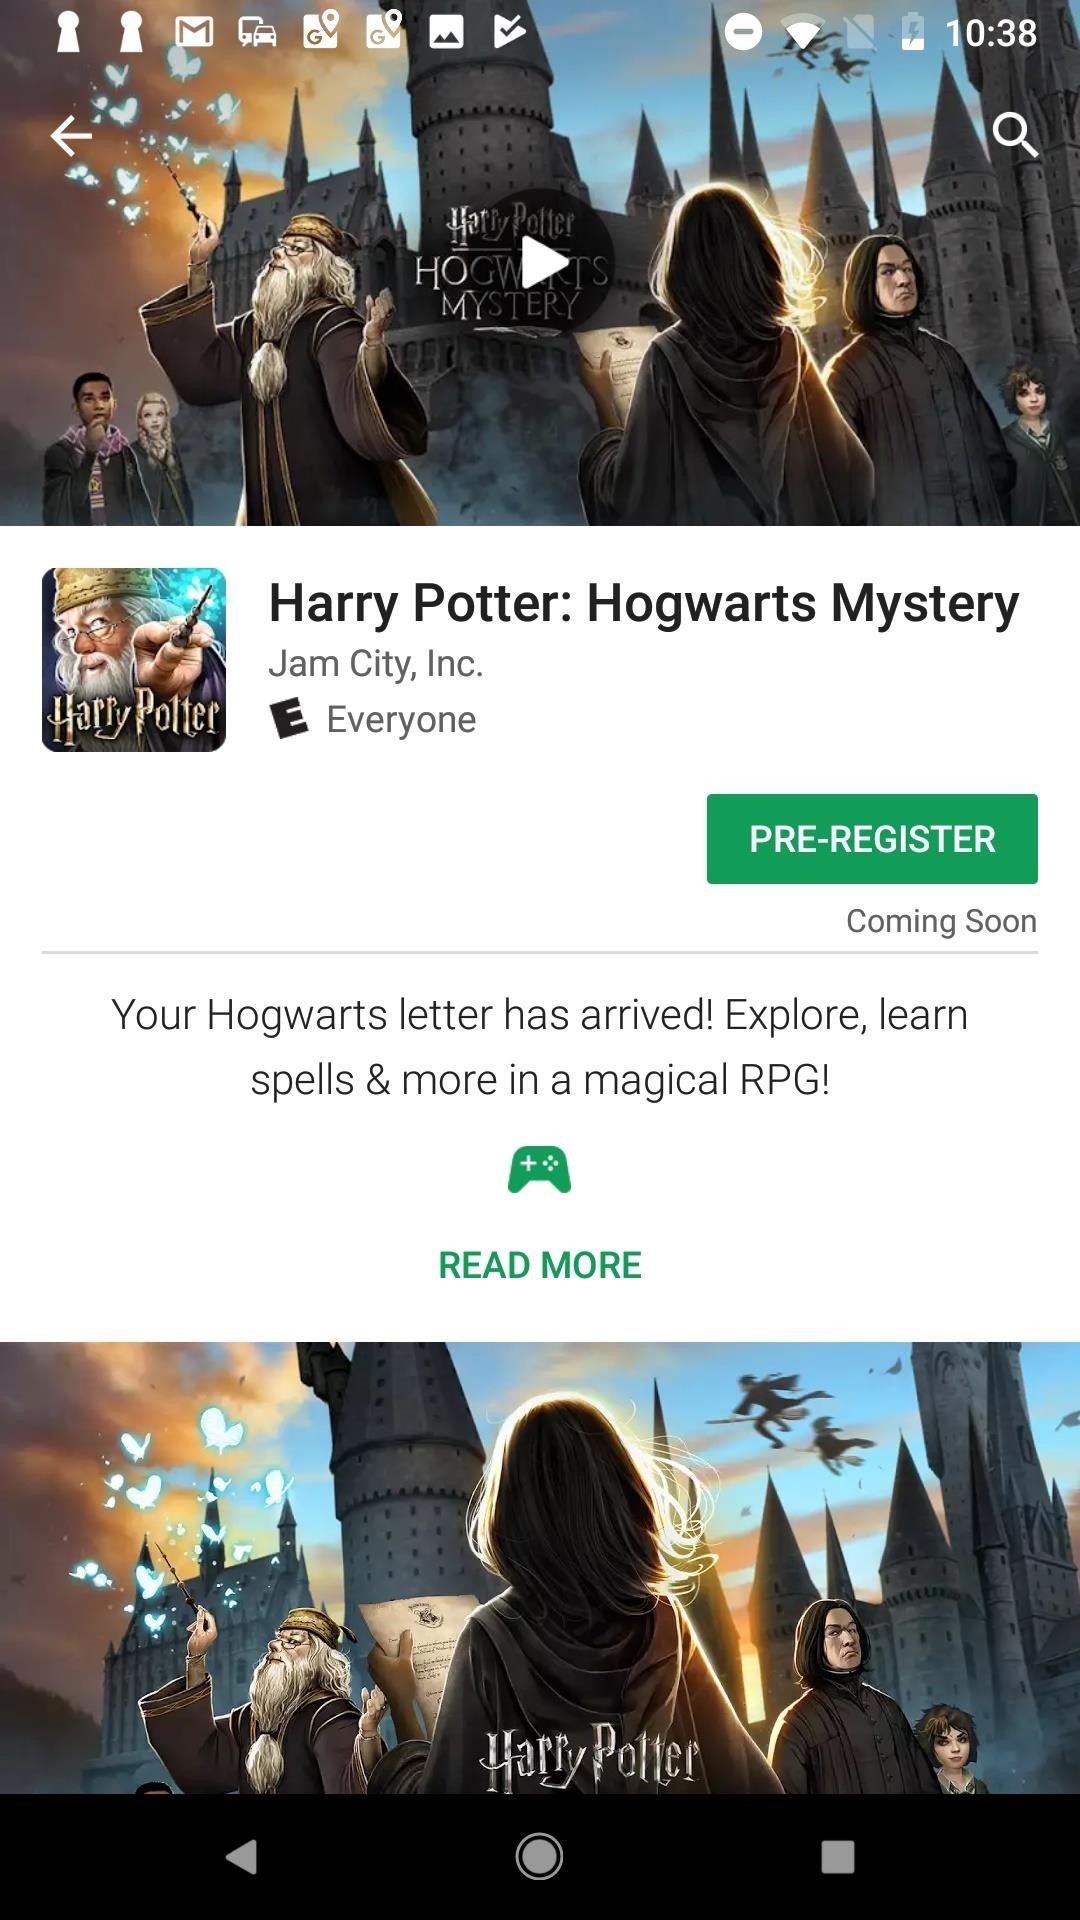 How to Pre-Register for Jam City's 'Harry Potter: Hogwarts Mystery' Game Right Now